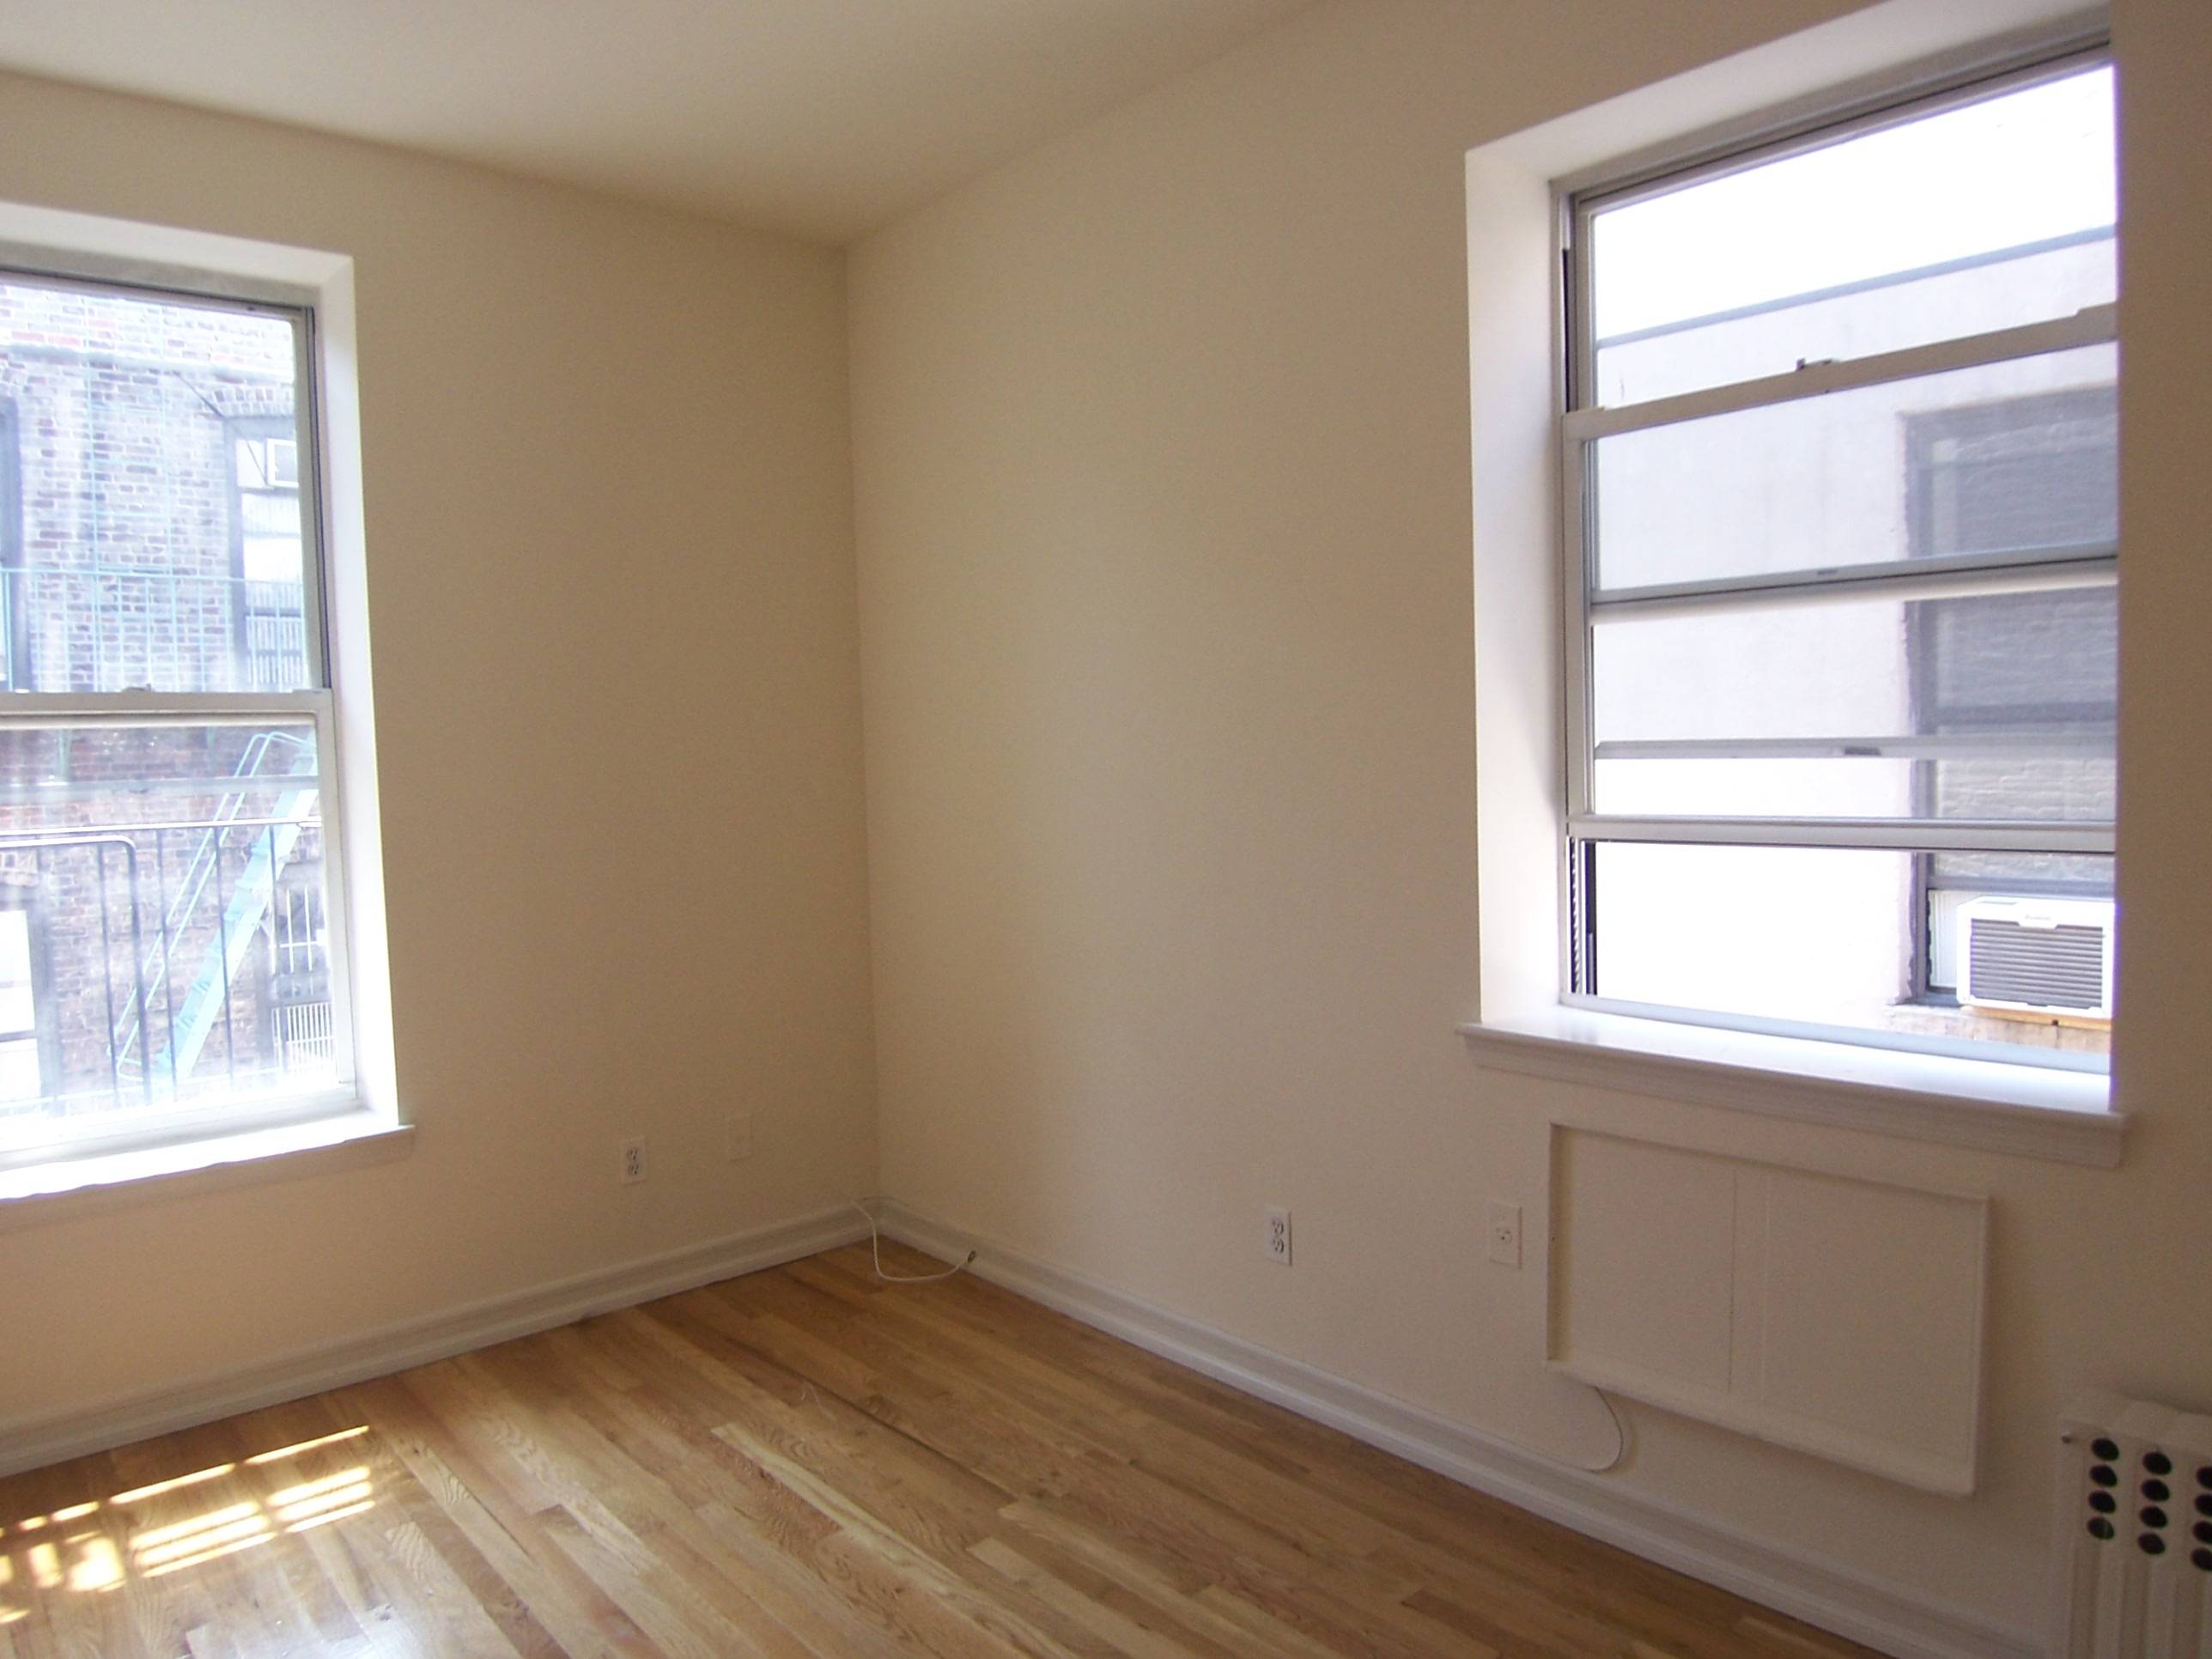 Two Bedrooms Apartment for Rent near Columbia University